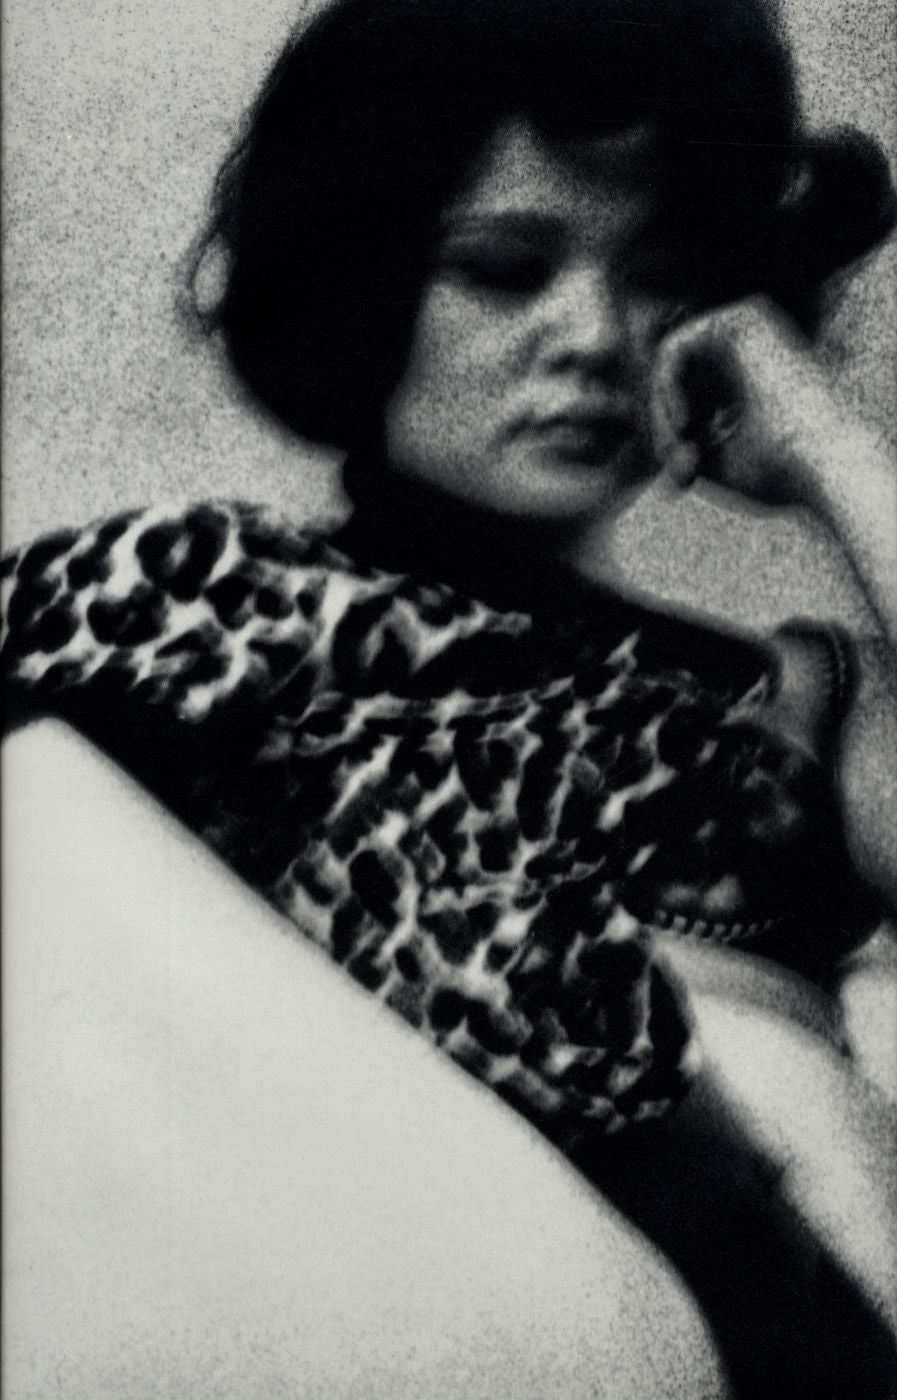 NZ Library #1: Daido Moriyama: Mantis, Limited Edition (NZ Library - Set One, Volume Five) [SIGNED]